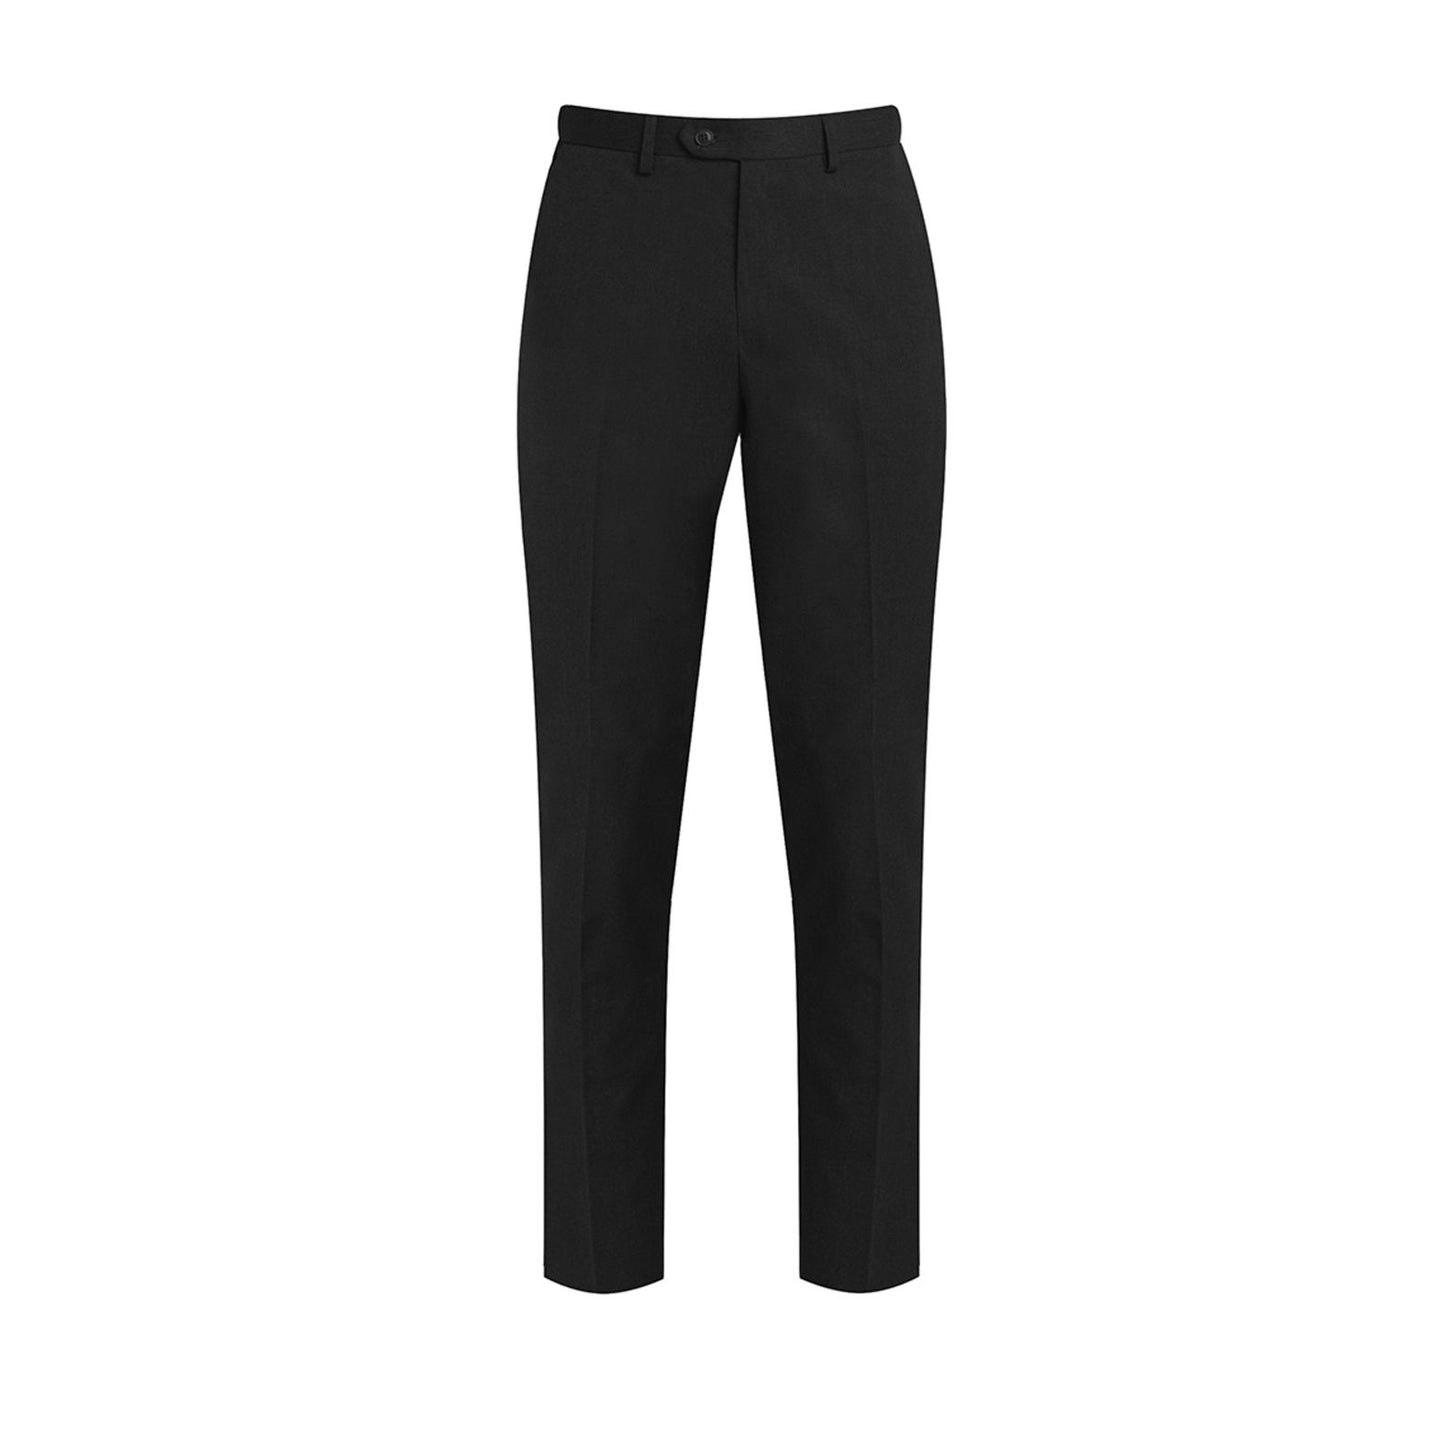 UALS Boys Tailored Trousers